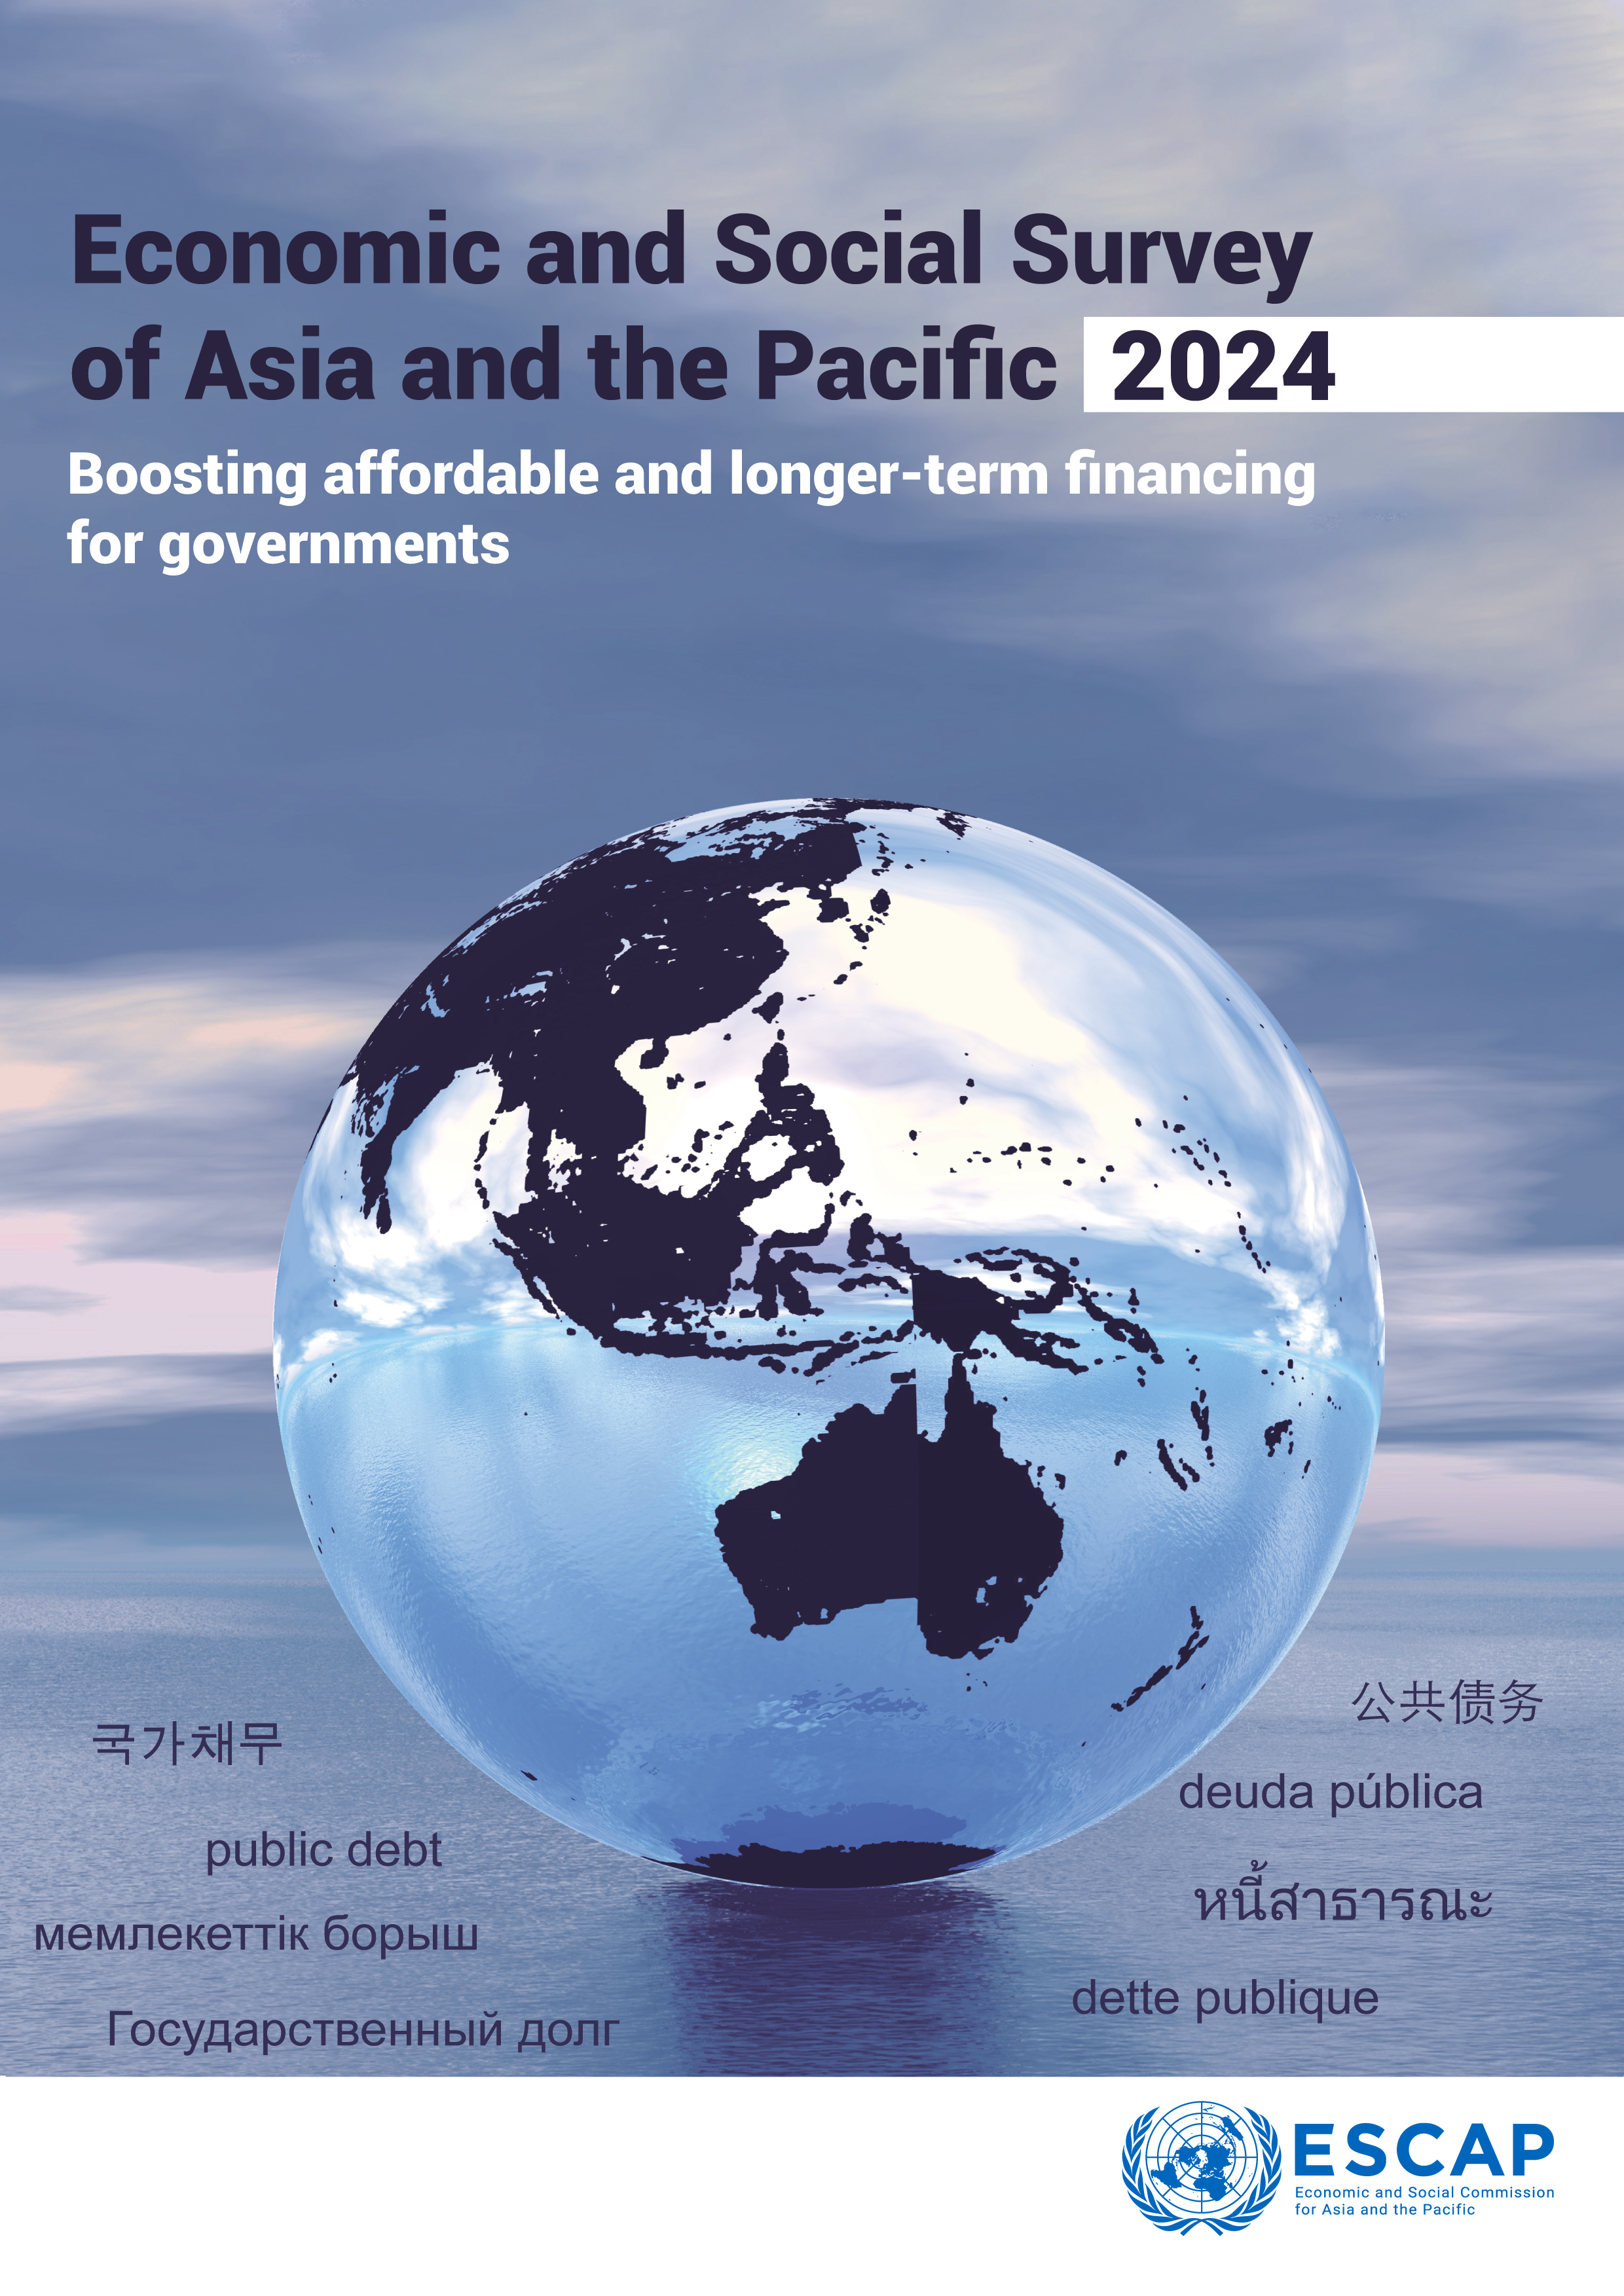 image of Economic and Social Survey of Asia and the Pacific 2024